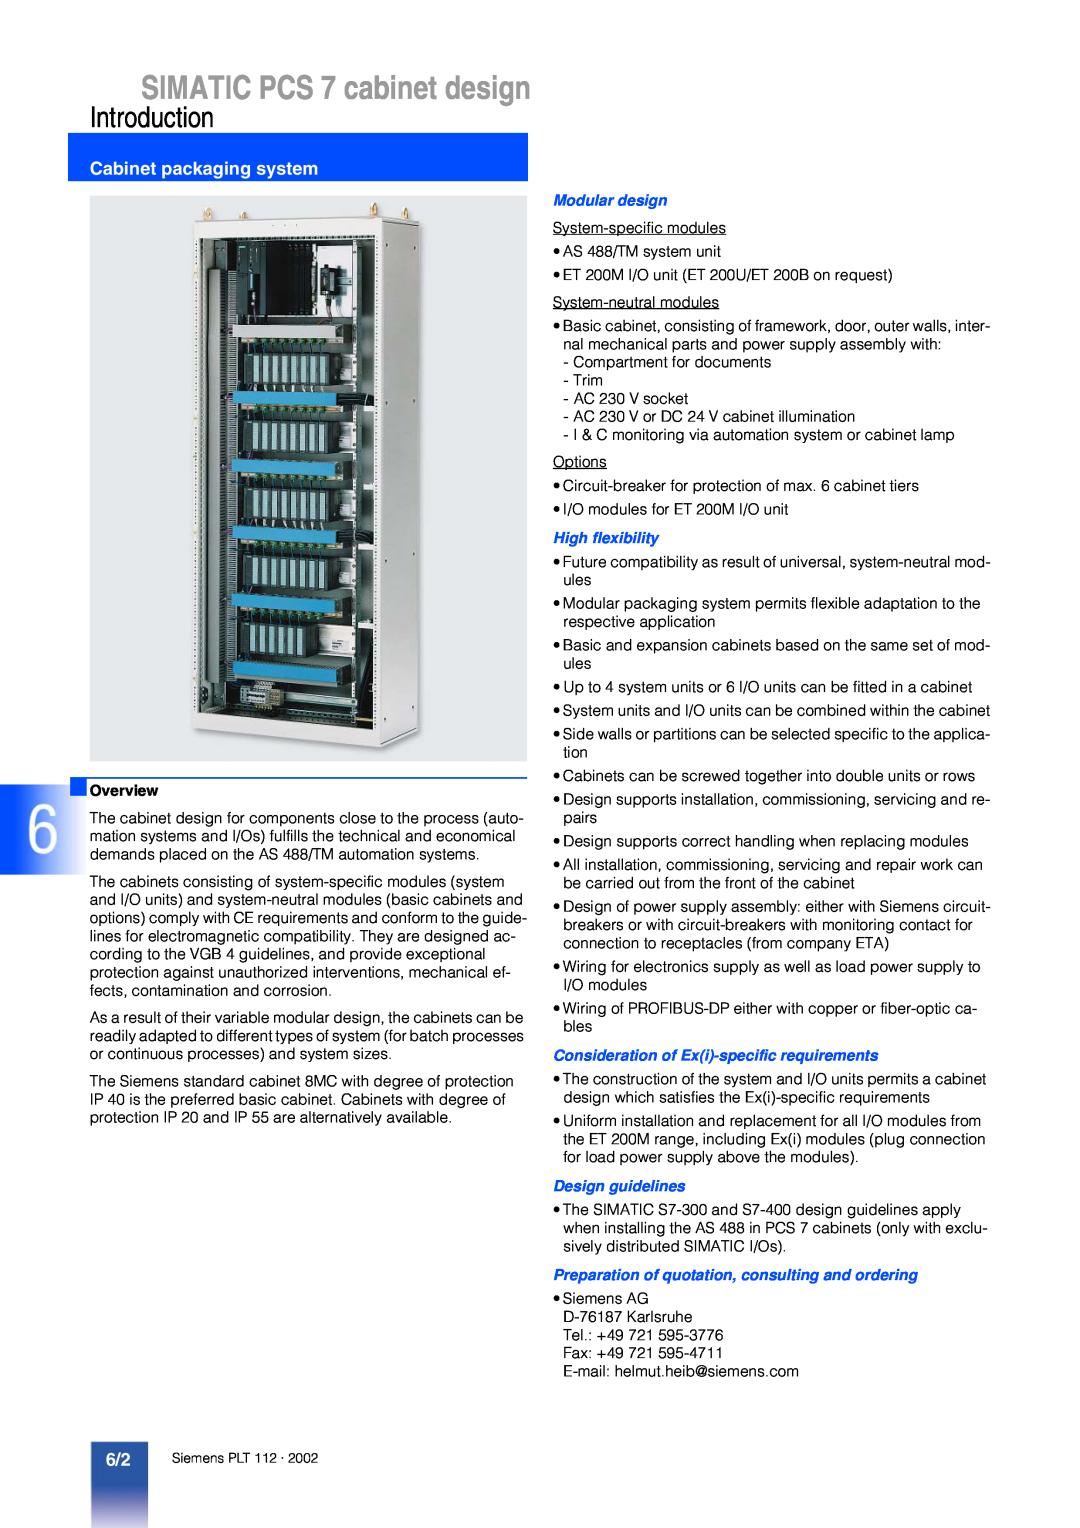 Siemens manual SIMATIC PCS 7 cabinet design, Cabinet packaging system, Overview, Modular design, High flexibility 